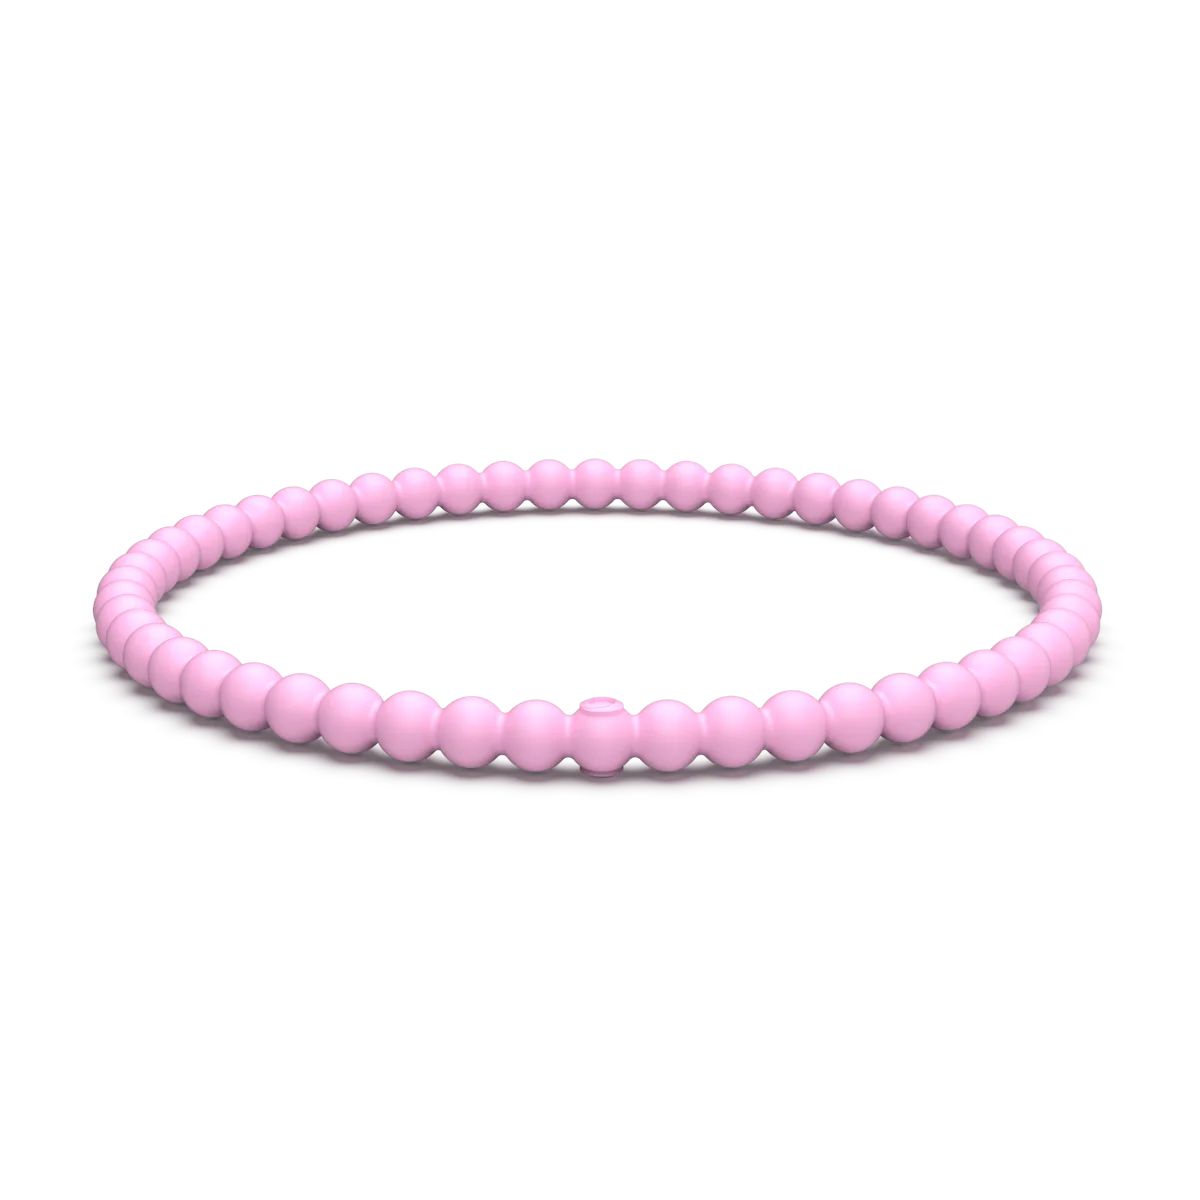 Enso's premium silicone bracelets are stylish, flexible, and super comfortable. Our new Cherry Bl... | Enso Rings